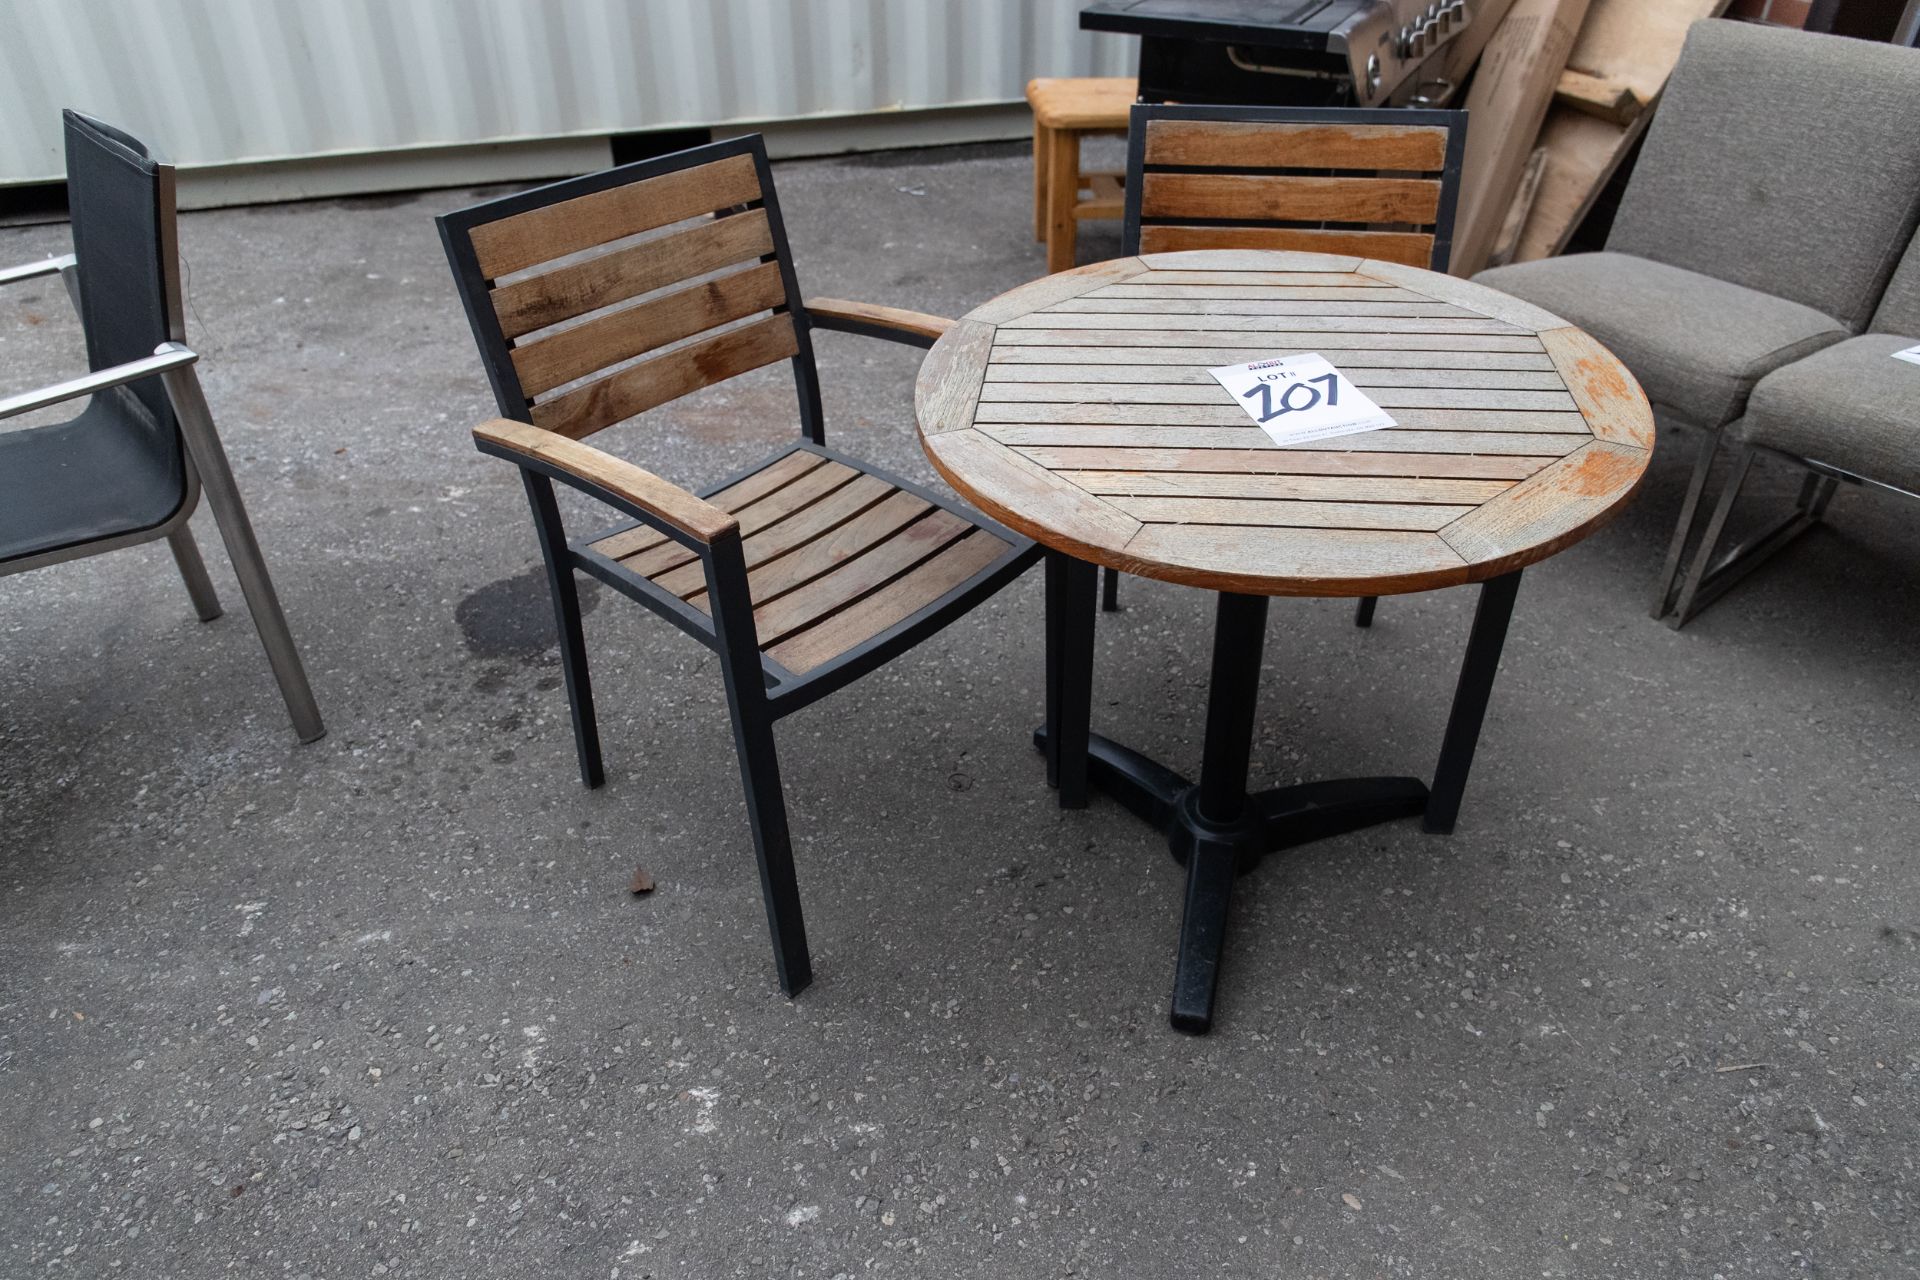 TEAK OUTDOOR ROUND TABLE WITH 2 CHAIRS - Image 2 of 3